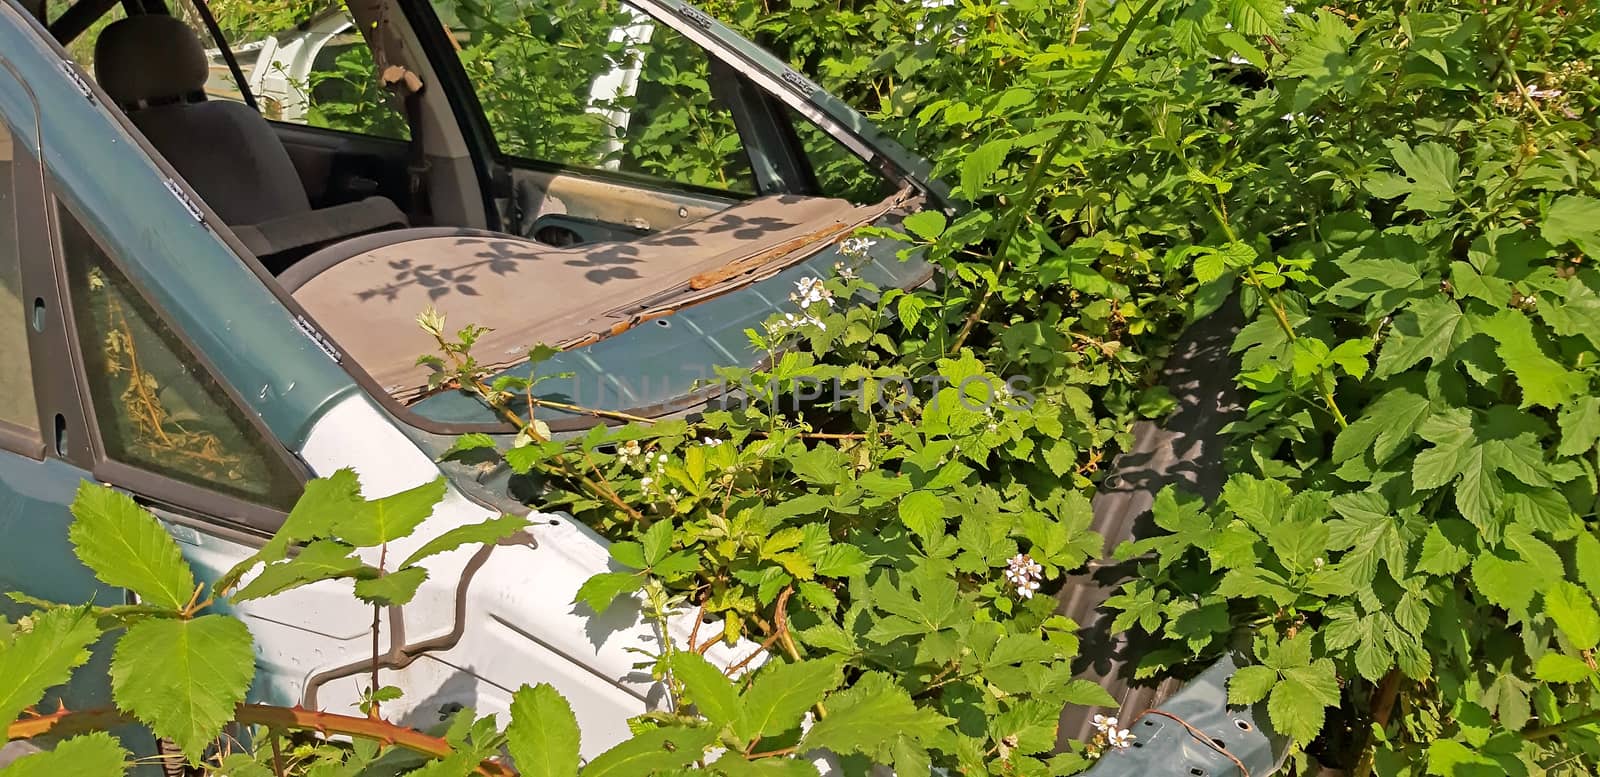 Abandoned and broken car. Grows wild plants in it by Mindru